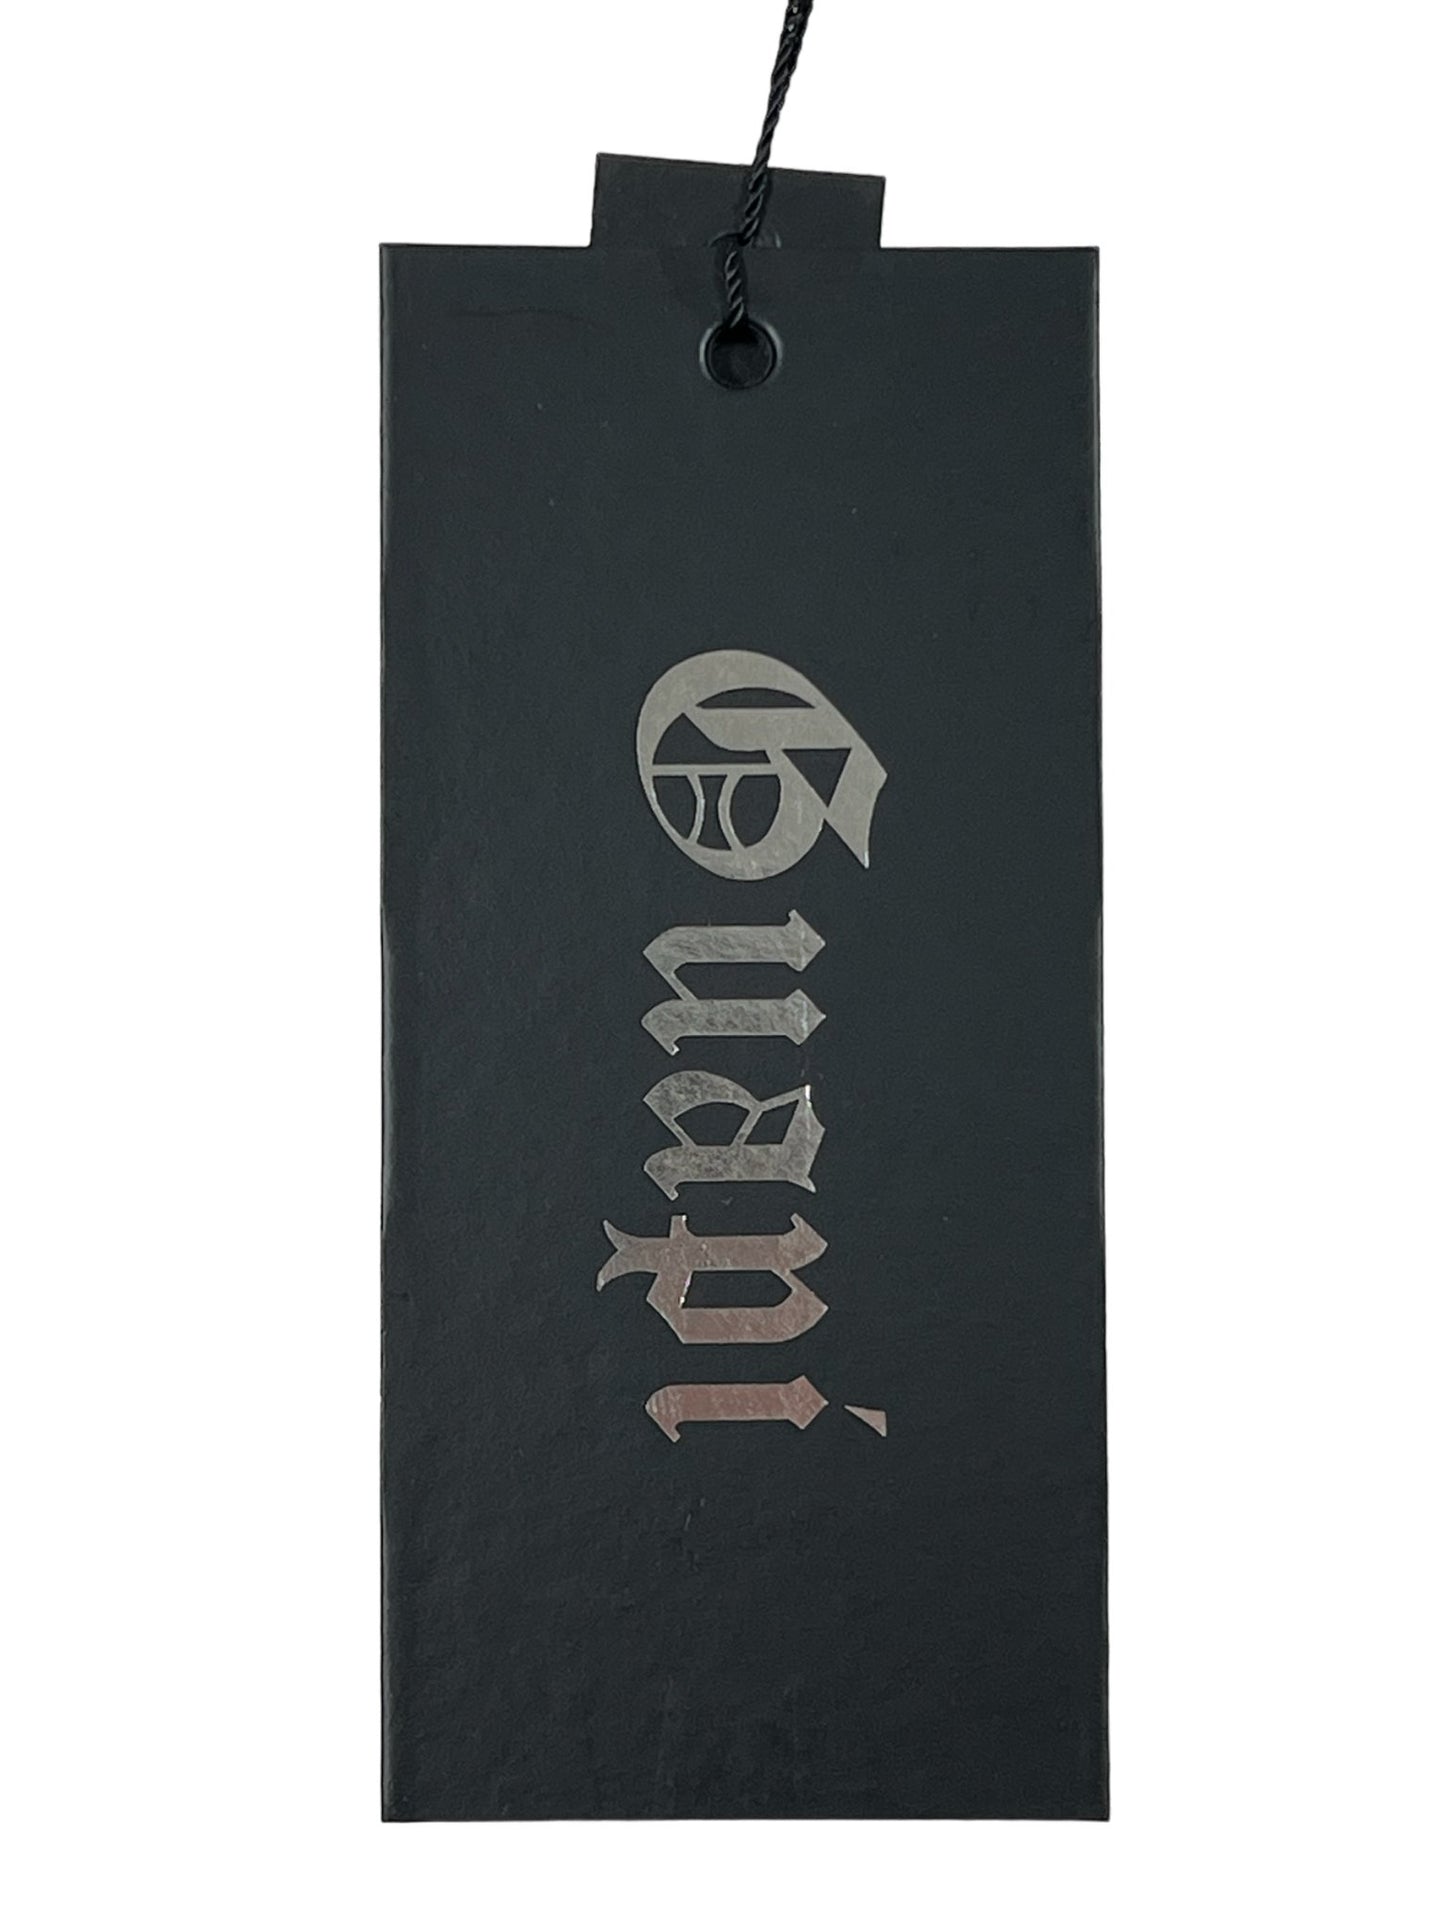 Black GUAPI luxury denim price tag with cut-out logo and text design hanging by a string.